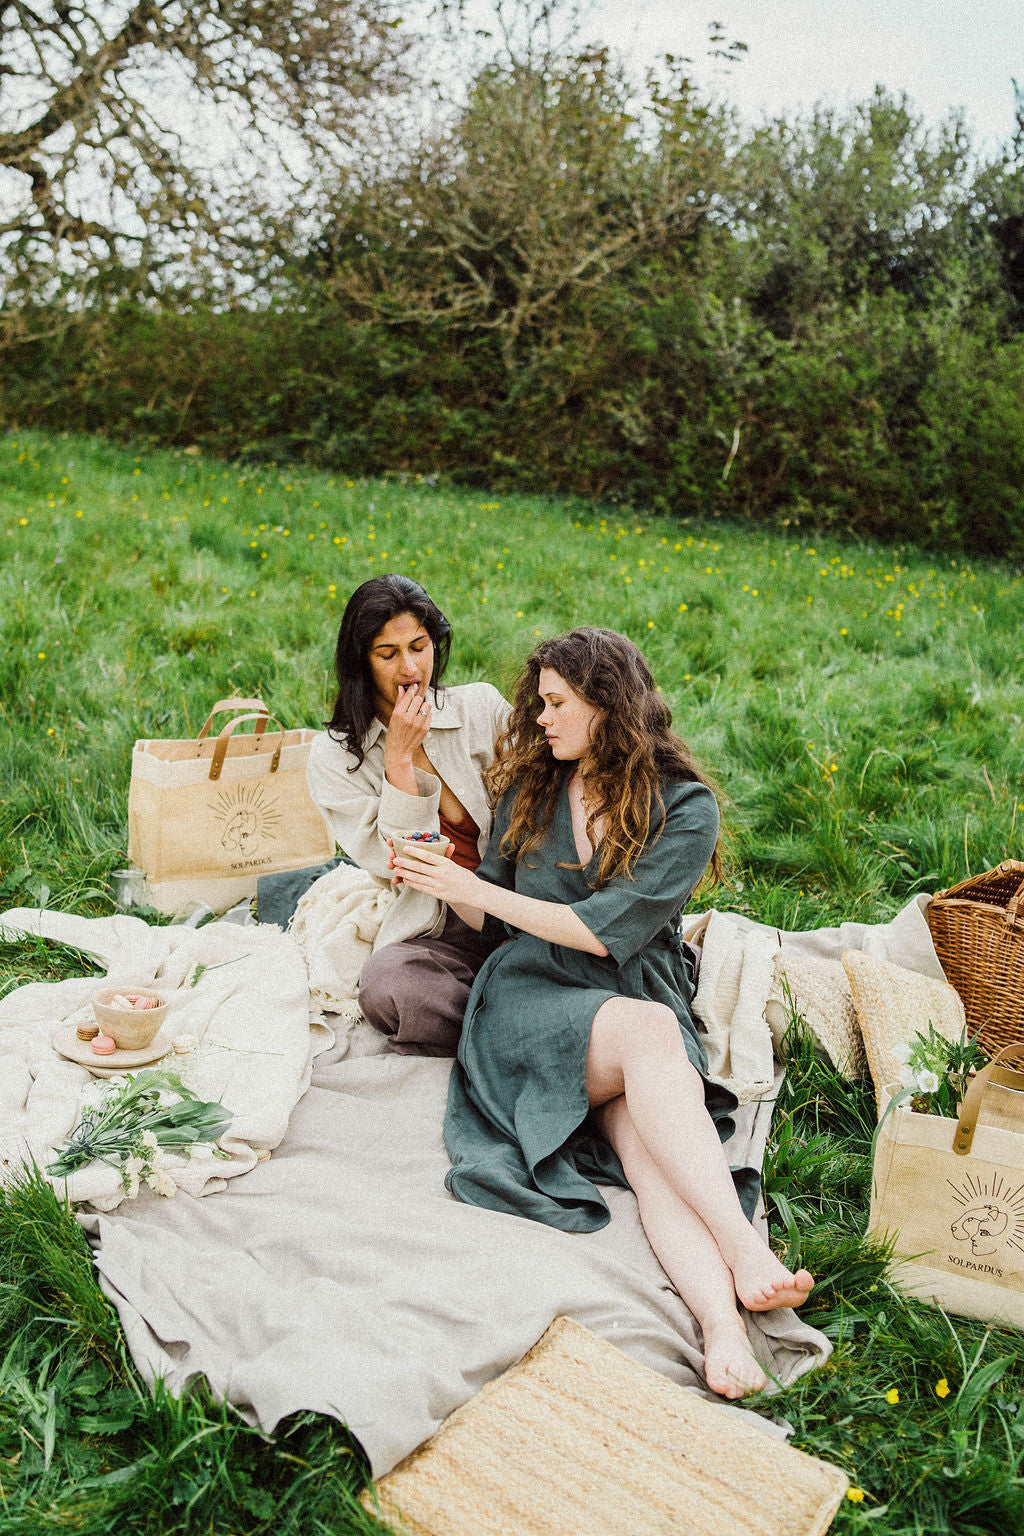 Solpardus ‘Everything’ bag. Jute and juco bag with buffalo leather handles, brass feet and premium flock heat transfer to give the Solpardus logo a luxurious velvet texture. A picnic with friends in Cornwall